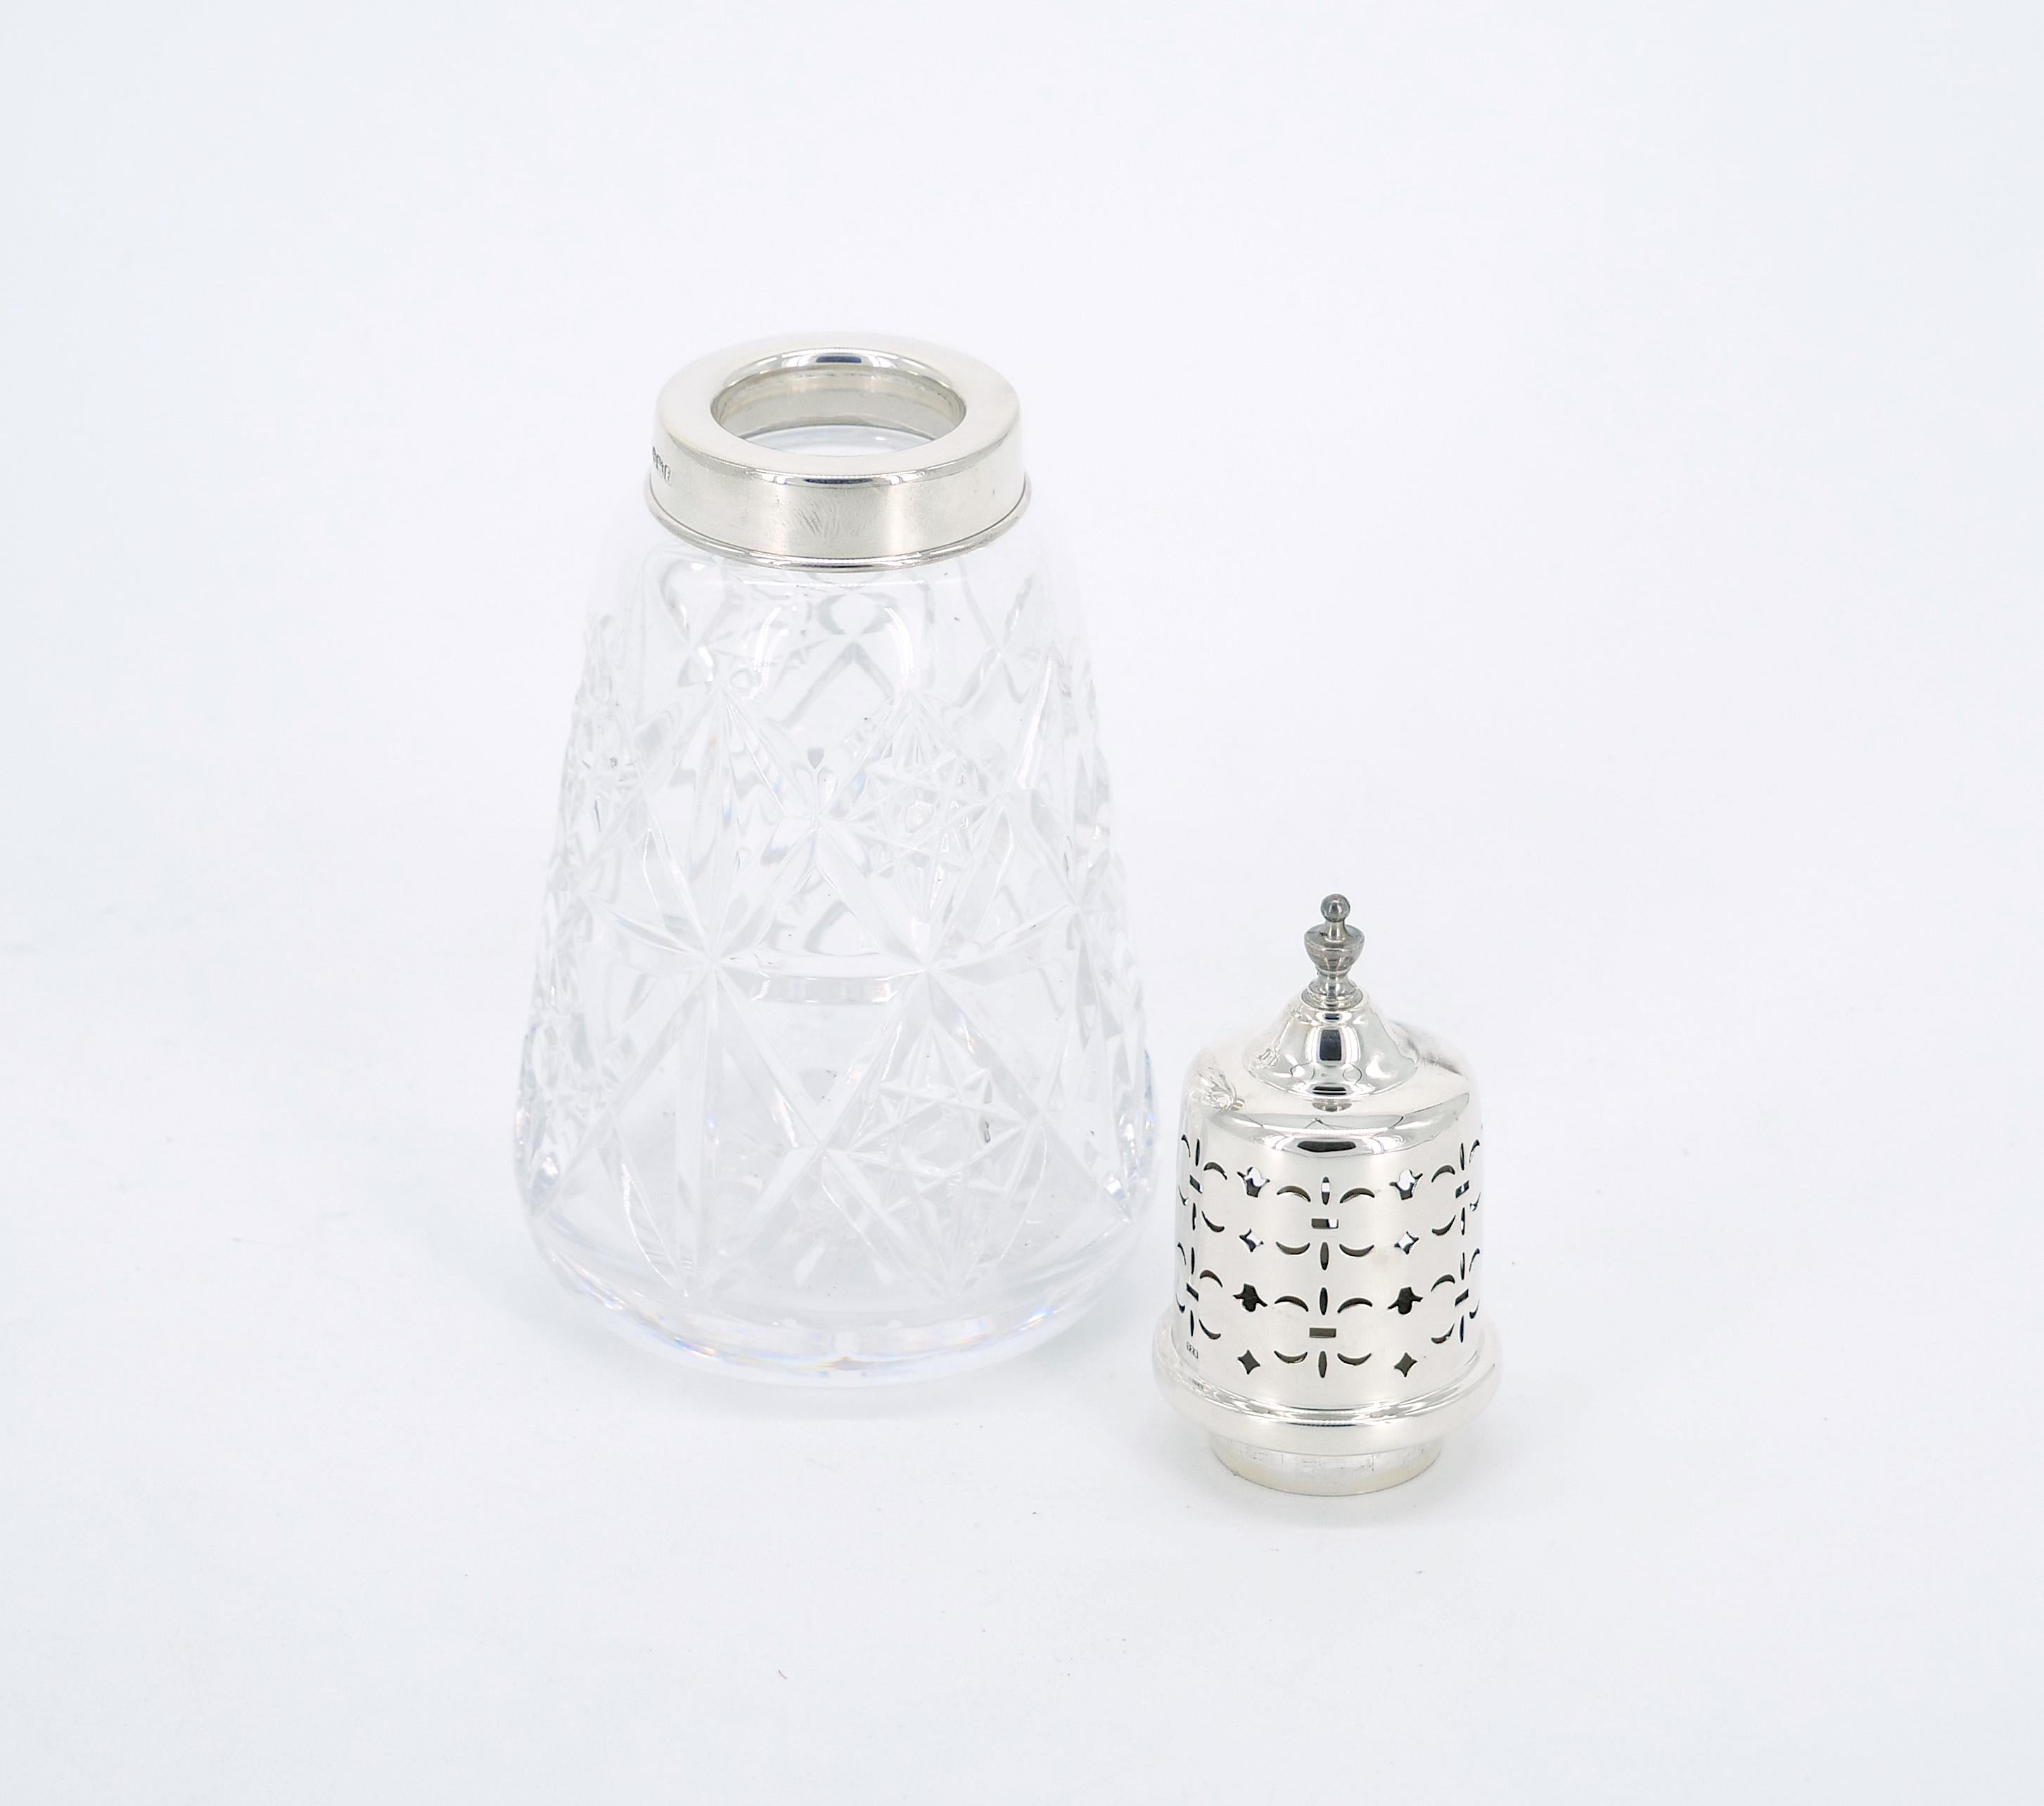 Elevate your table setting with this exquisite English Sterling Silver Top Cut Glass Sugar Receptacle, a perfect blend of craftsmanship and elegance. The hand-engraved exterior adds a touch of sophistication to this classic piece of tableware. In